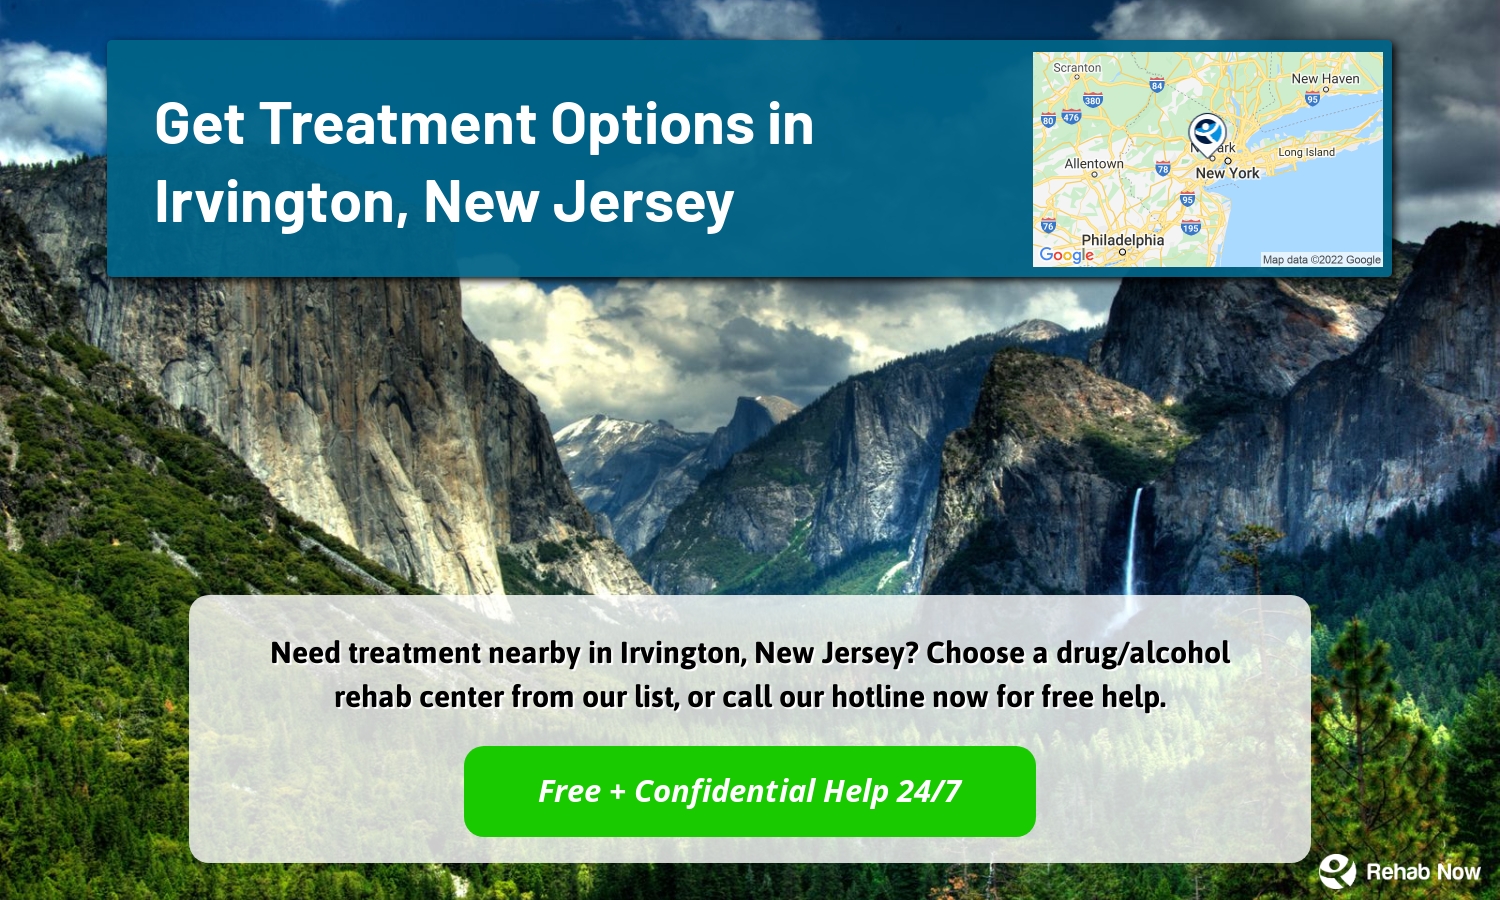 Need treatment nearby in Irvington, New Jersey? Choose a drug/alcohol rehab center from our list, or call our hotline now for free help.